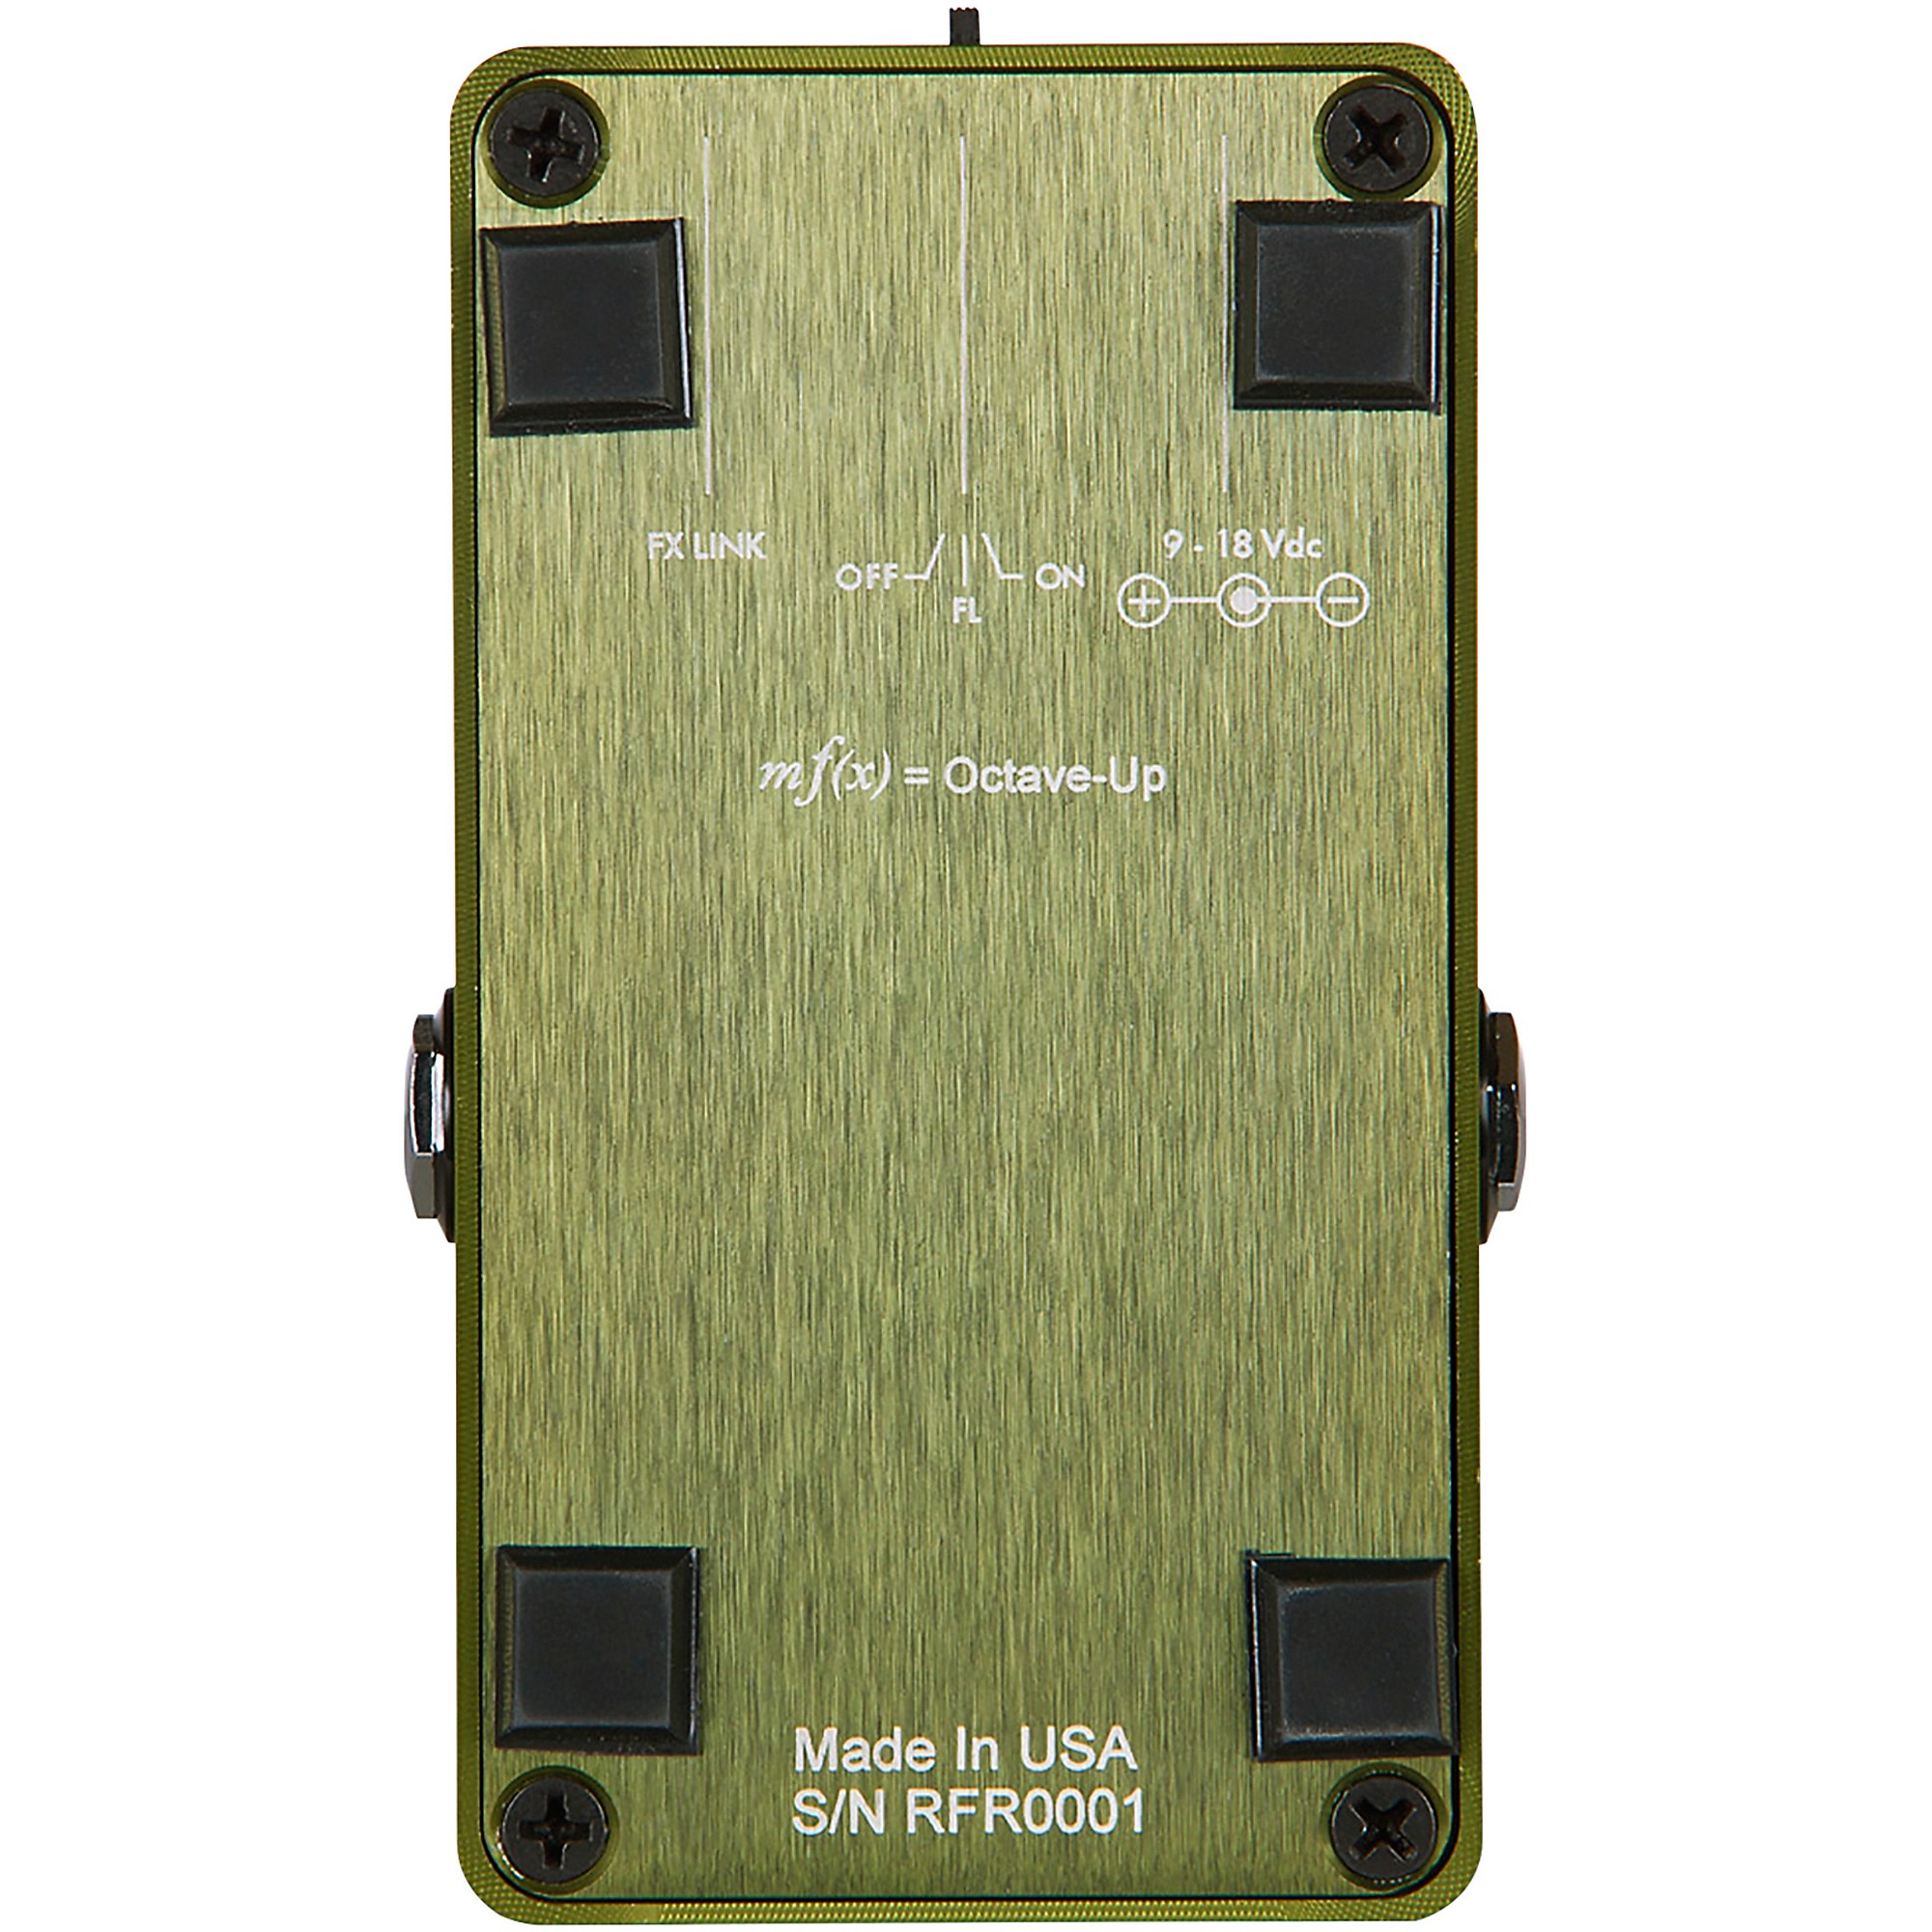 Suhr Rufus Reloaded Green